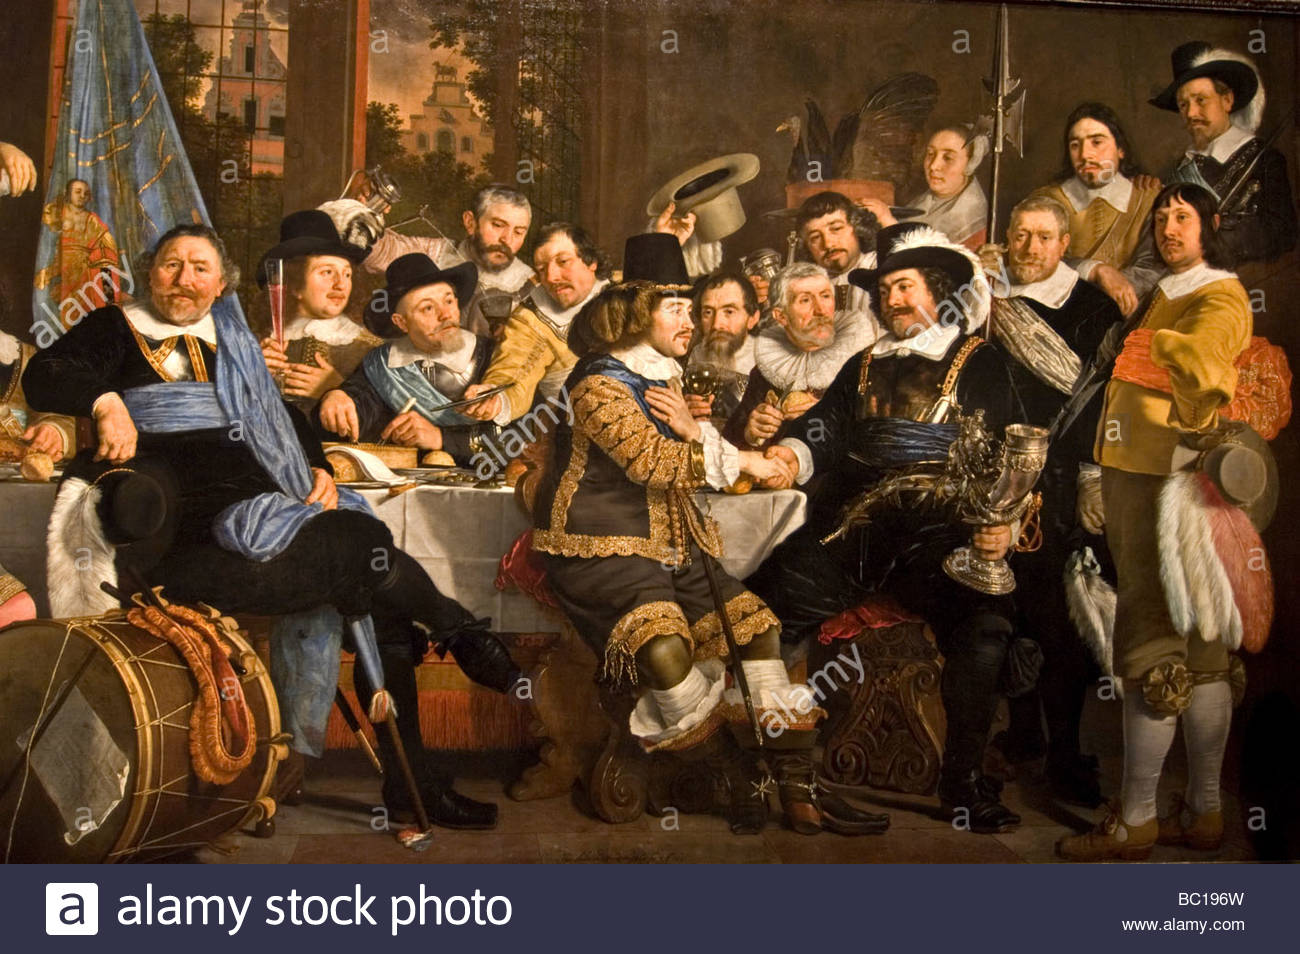 amsterdam-banquet-at-the-crossbowmens-guild-in-celebration-of-the-BC196W.jpg